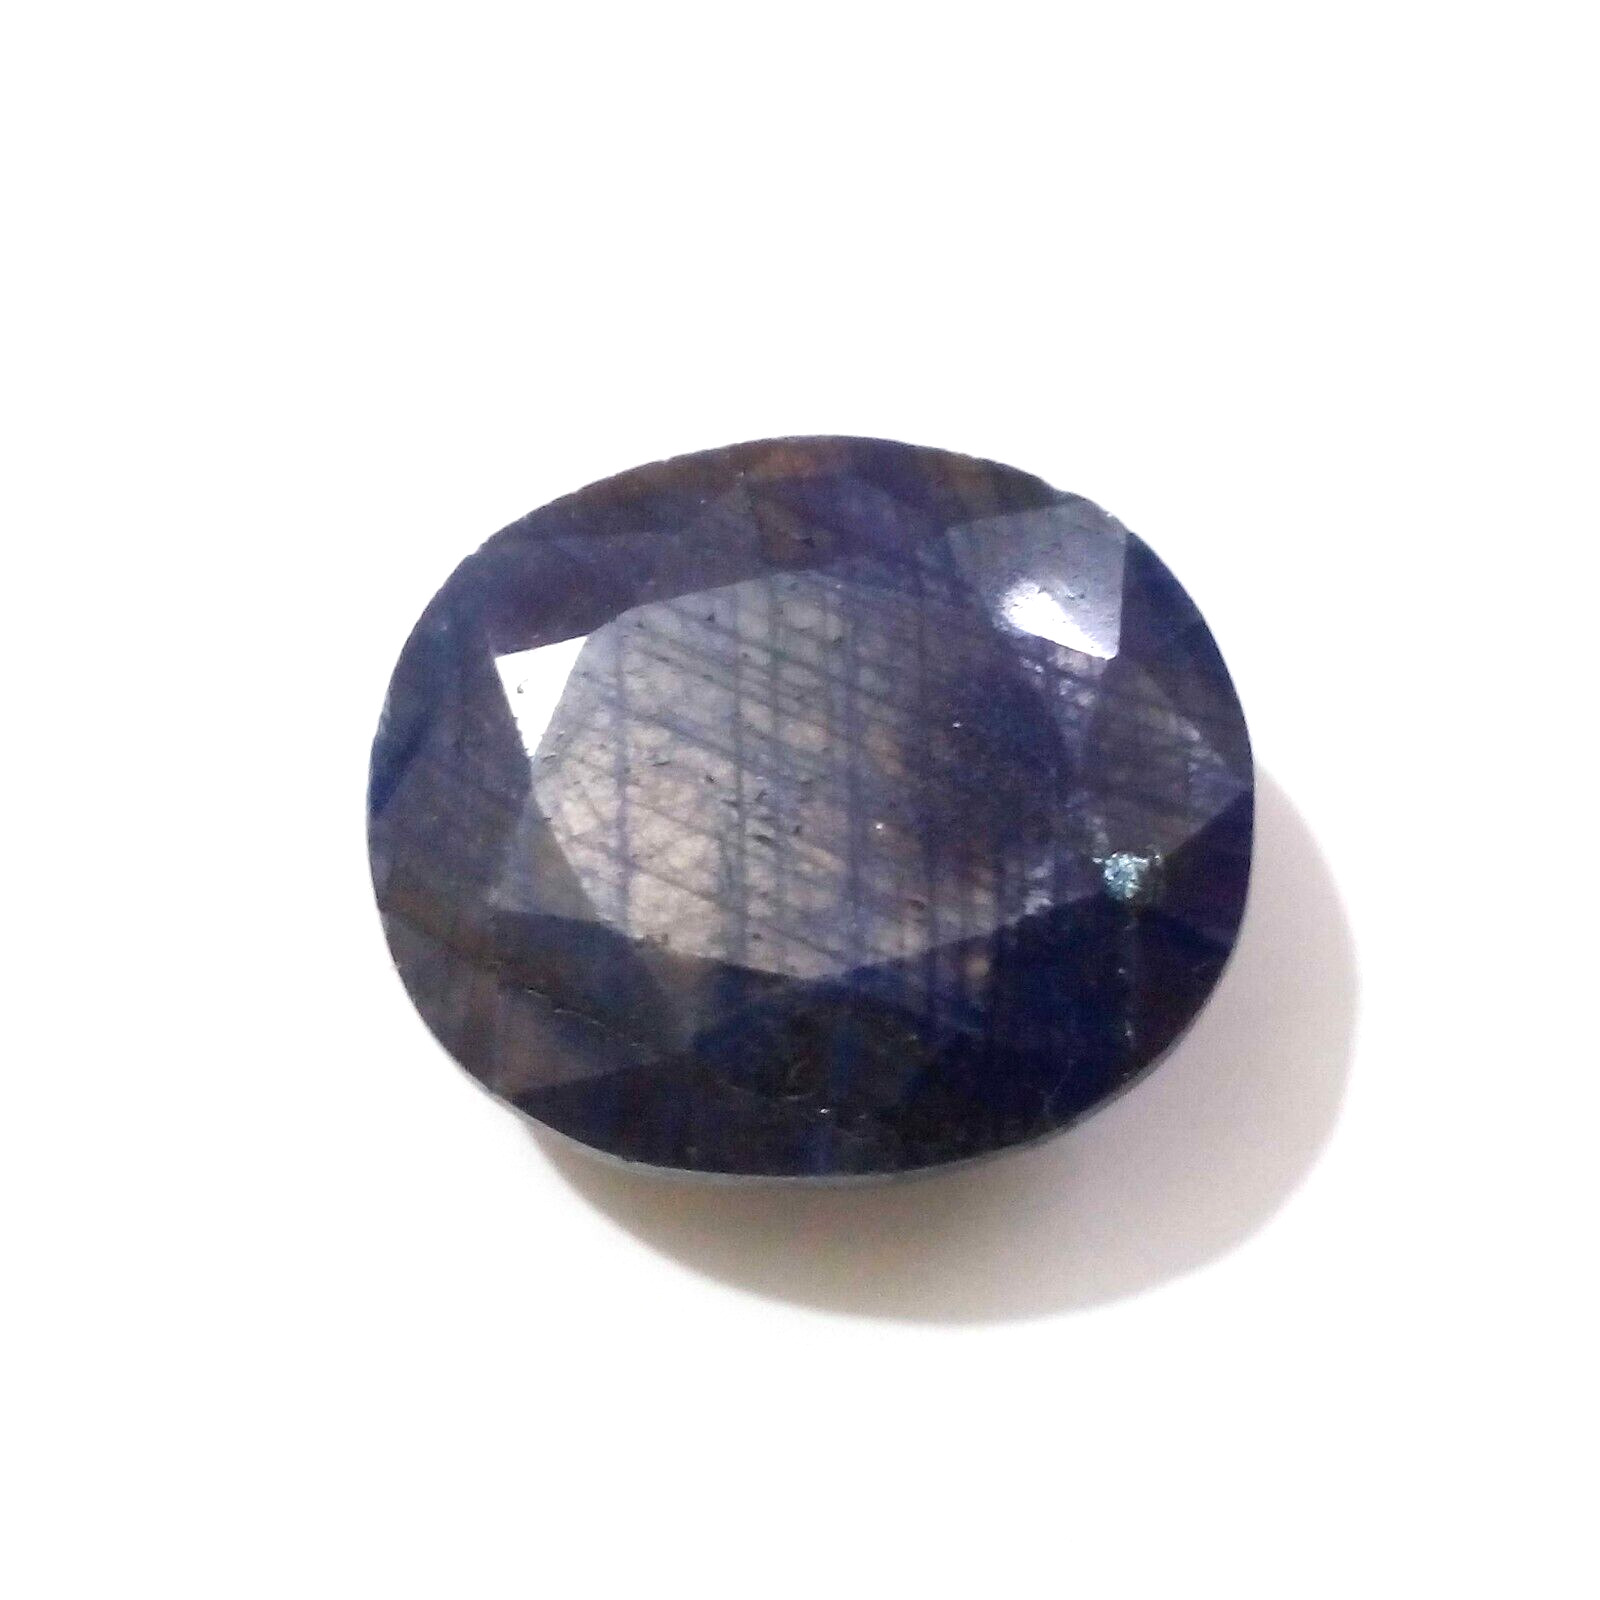 Attractive Madagascar Blue Sapphire Faceted Oval Shape 19.95 Crt Loose Gemstone